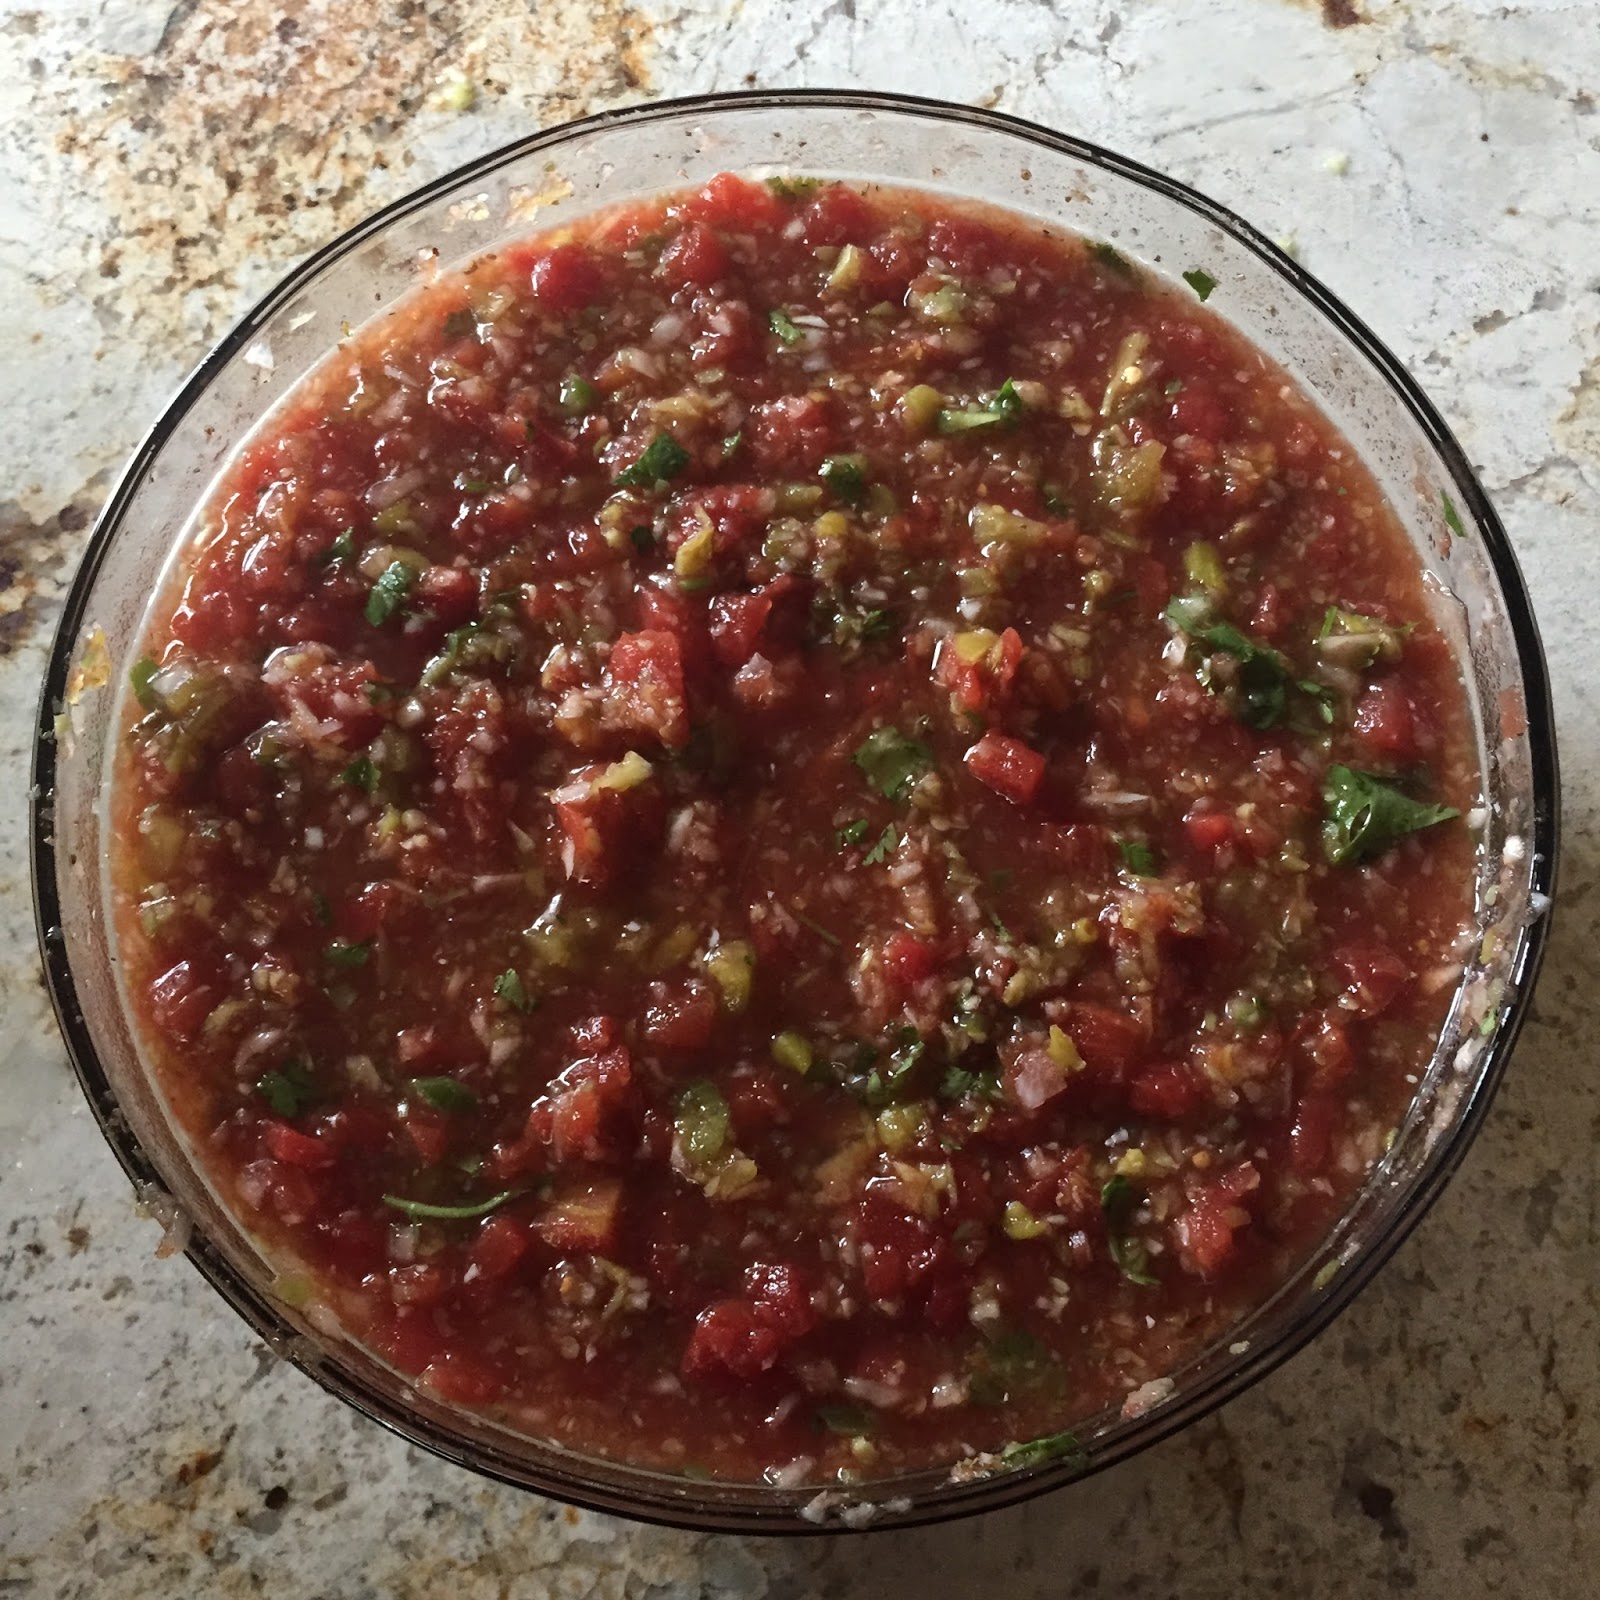 My Most Requested Recipes: Texas Salsa Is It Ok To Leave Salsa Out Overnight